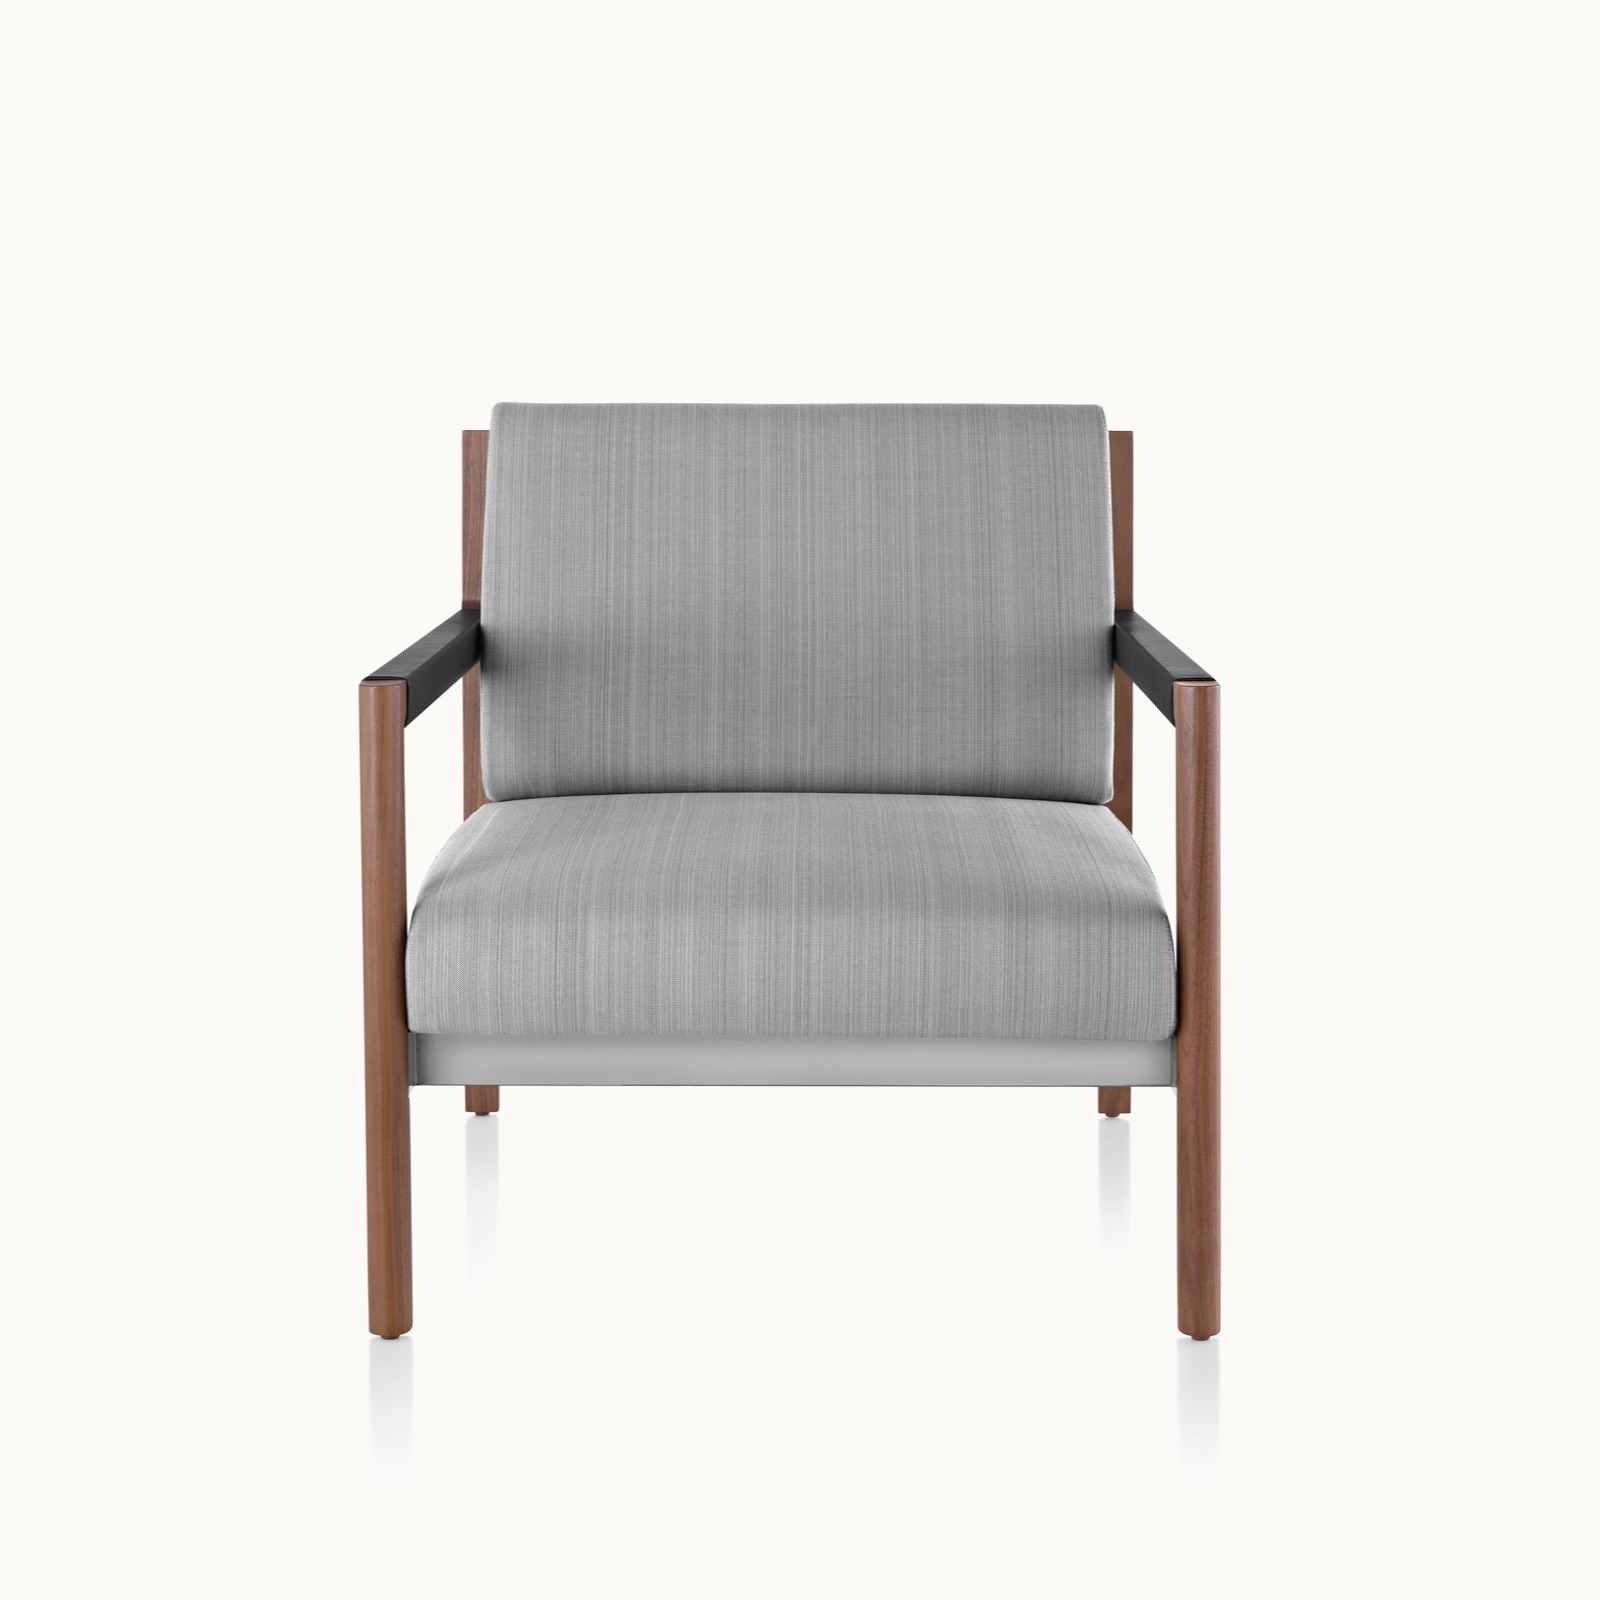 A Brabo club chair with light gray upholstery, leather and metal accents, and an exposed wood frame, viewed from the front.